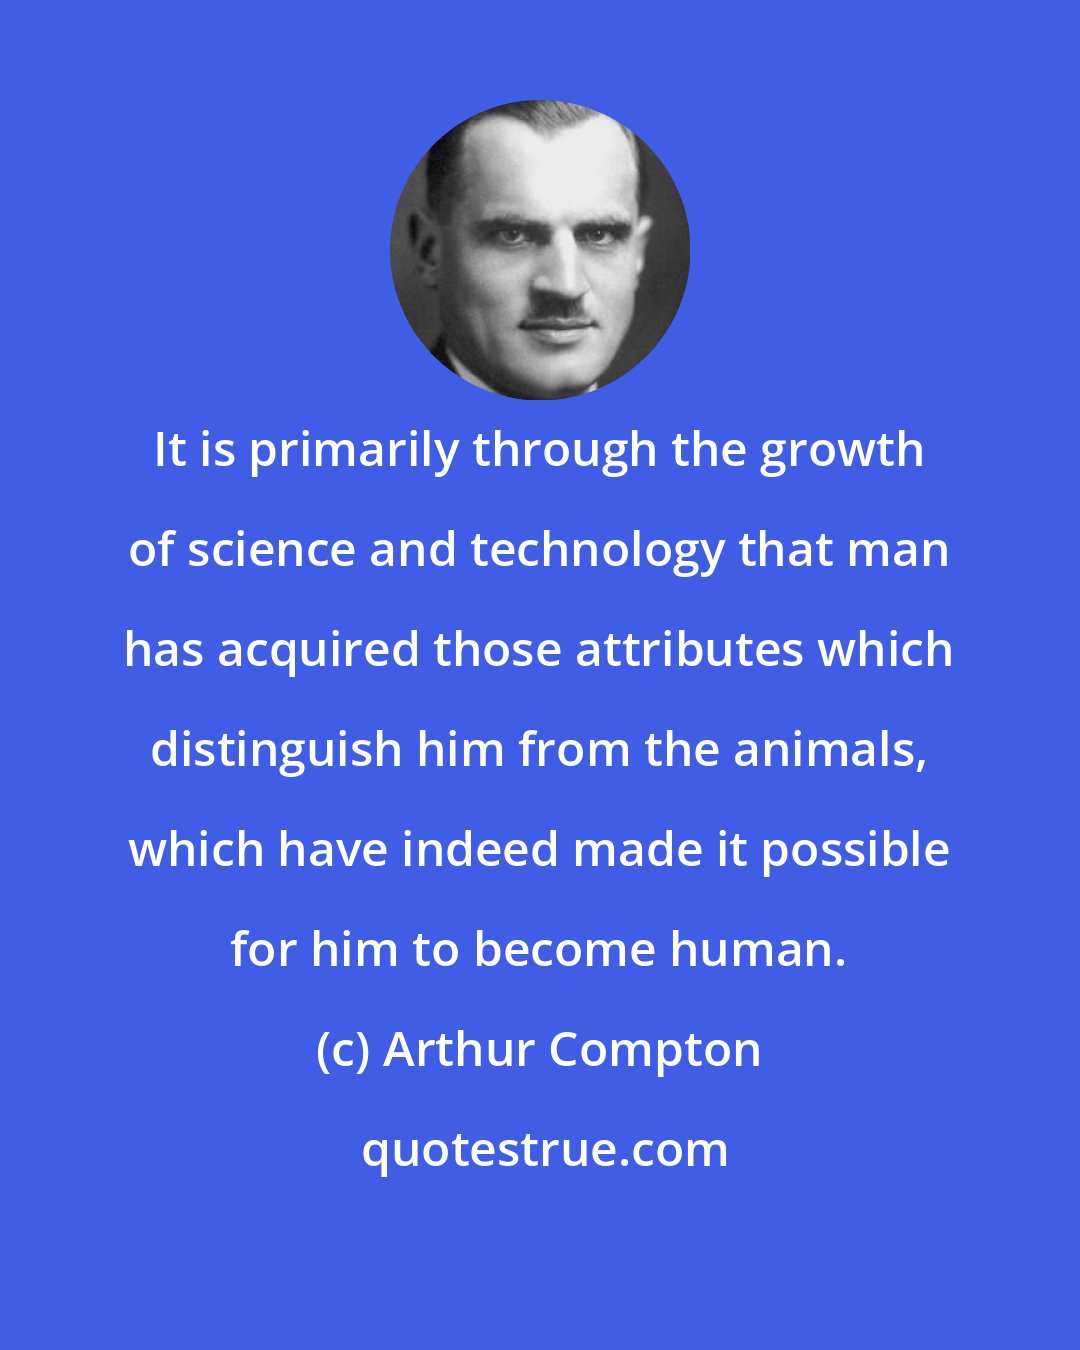 Arthur Compton: It is primarily through the growth of science and technology that man has acquired those attributes which distinguish him from the animals, which have indeed made it possible for him to become human.